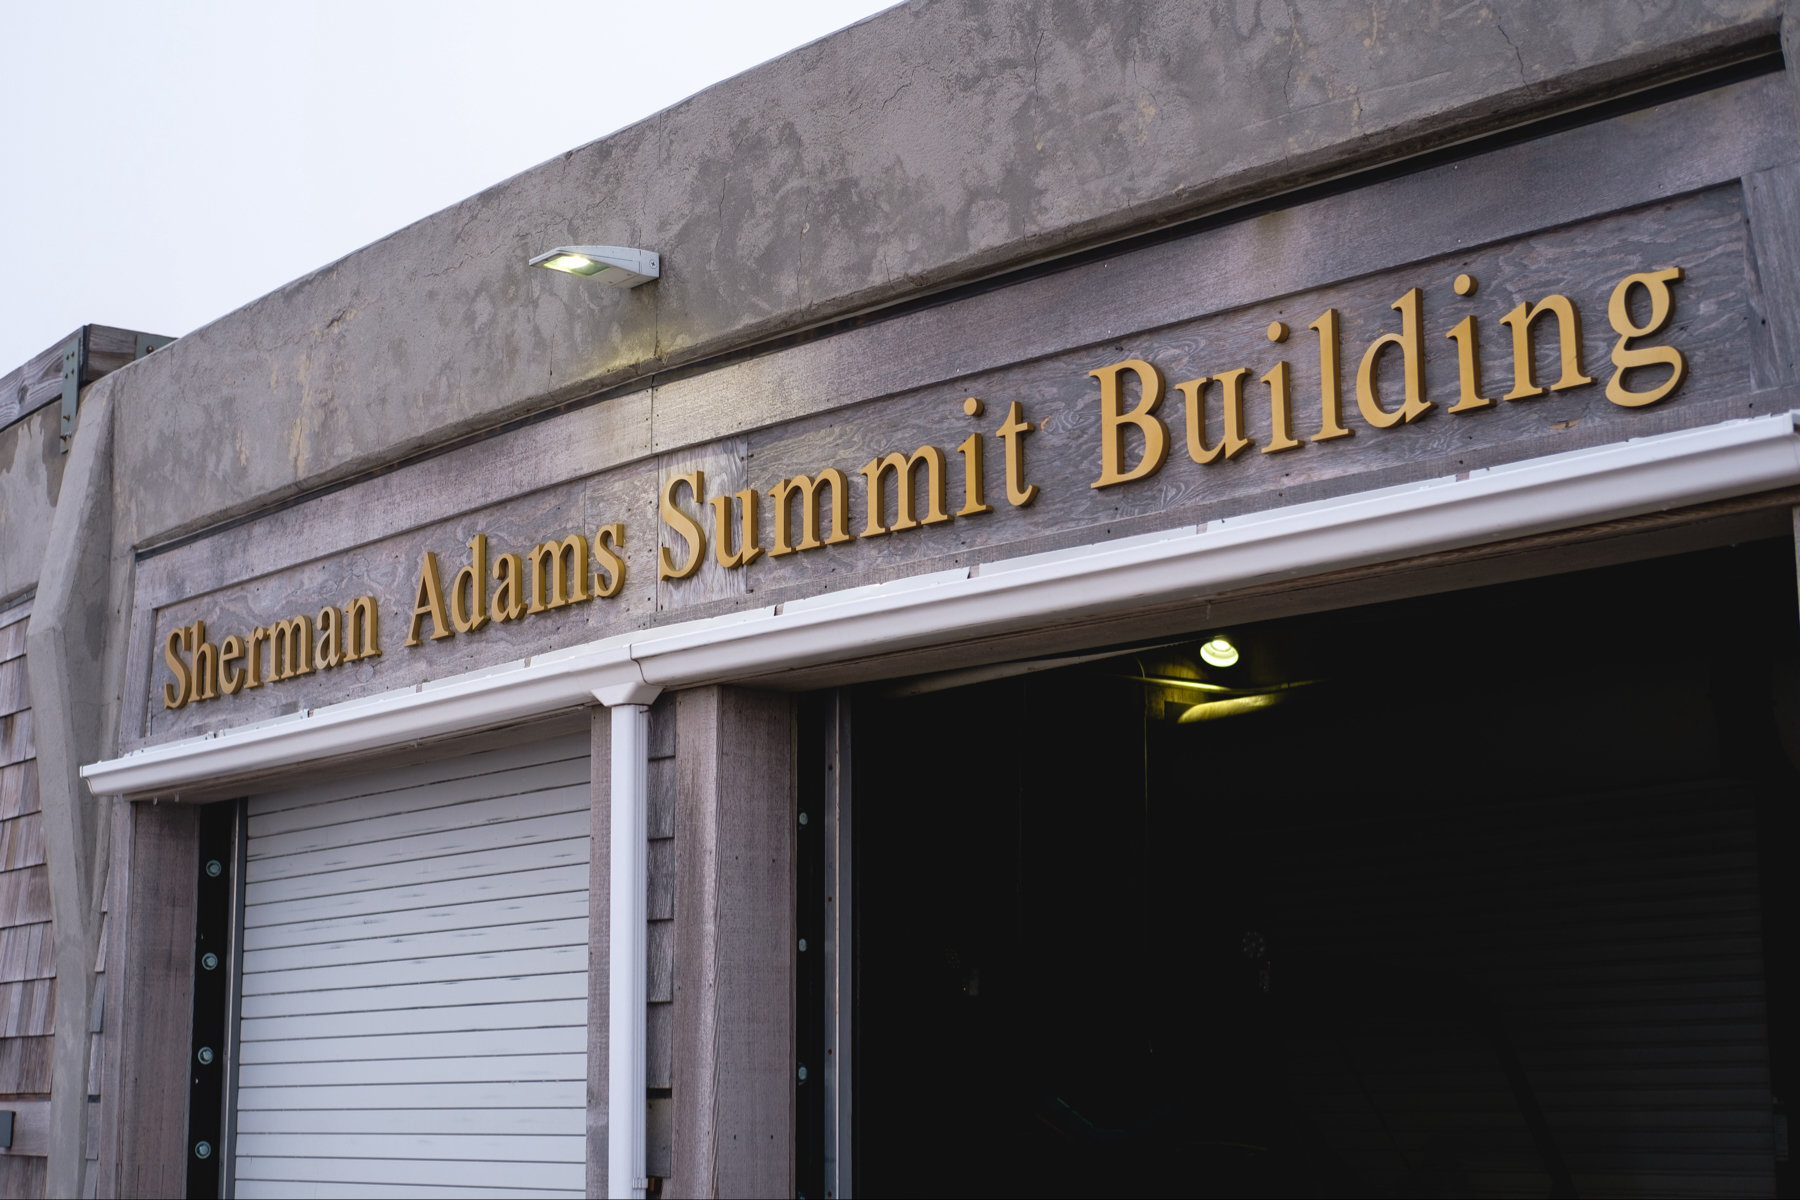 The image shows the exterior of the Sherman Adams Summit Building with its name sign displayed above a closed garage door.